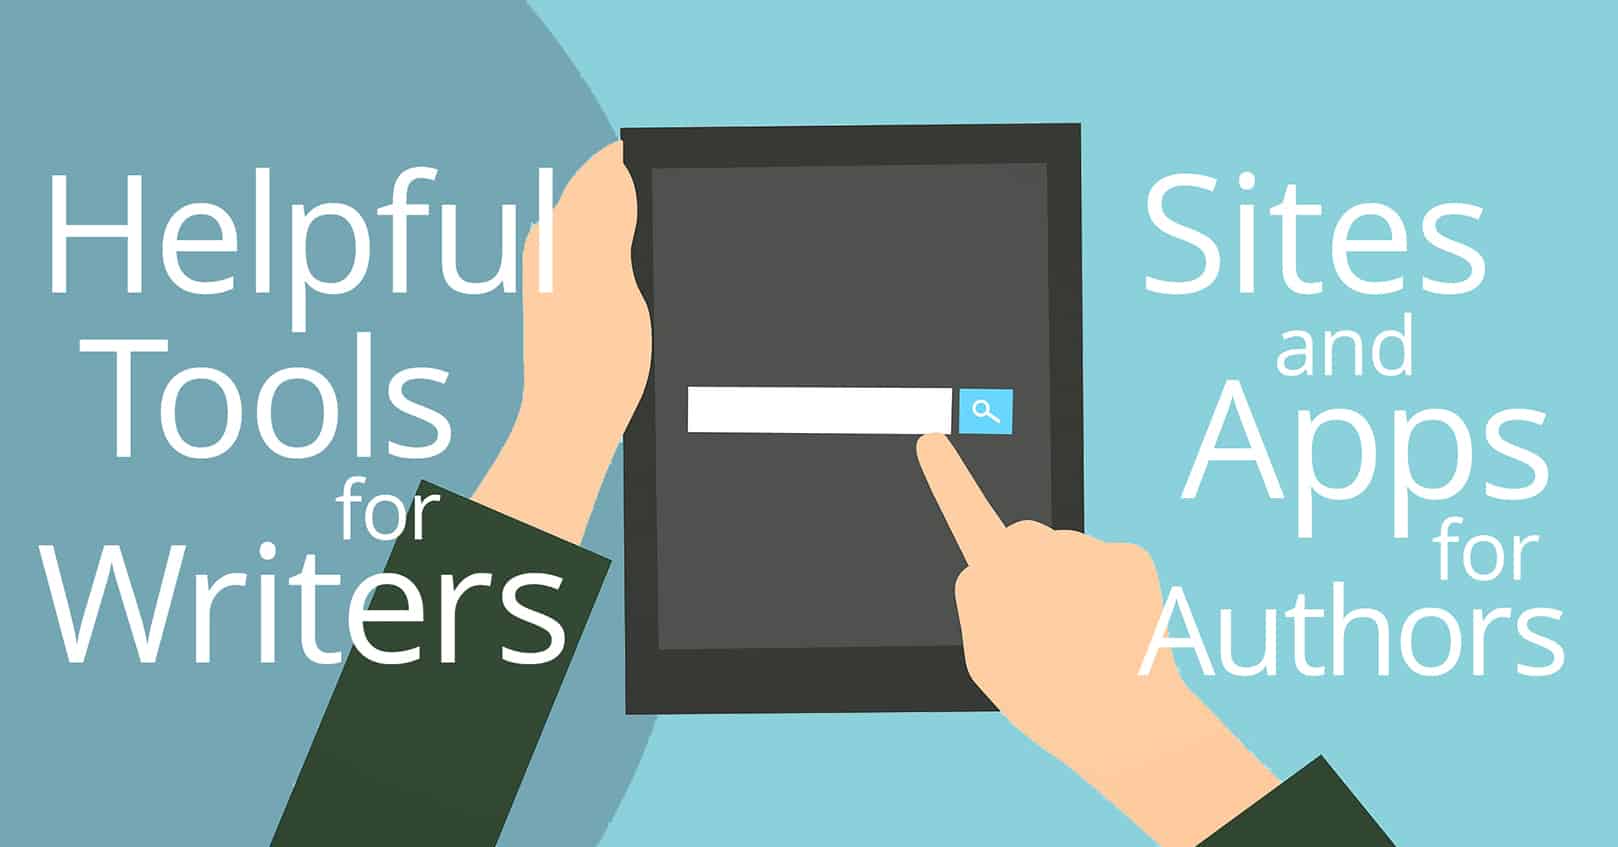 helpful tools for authors: sites and apps for authors